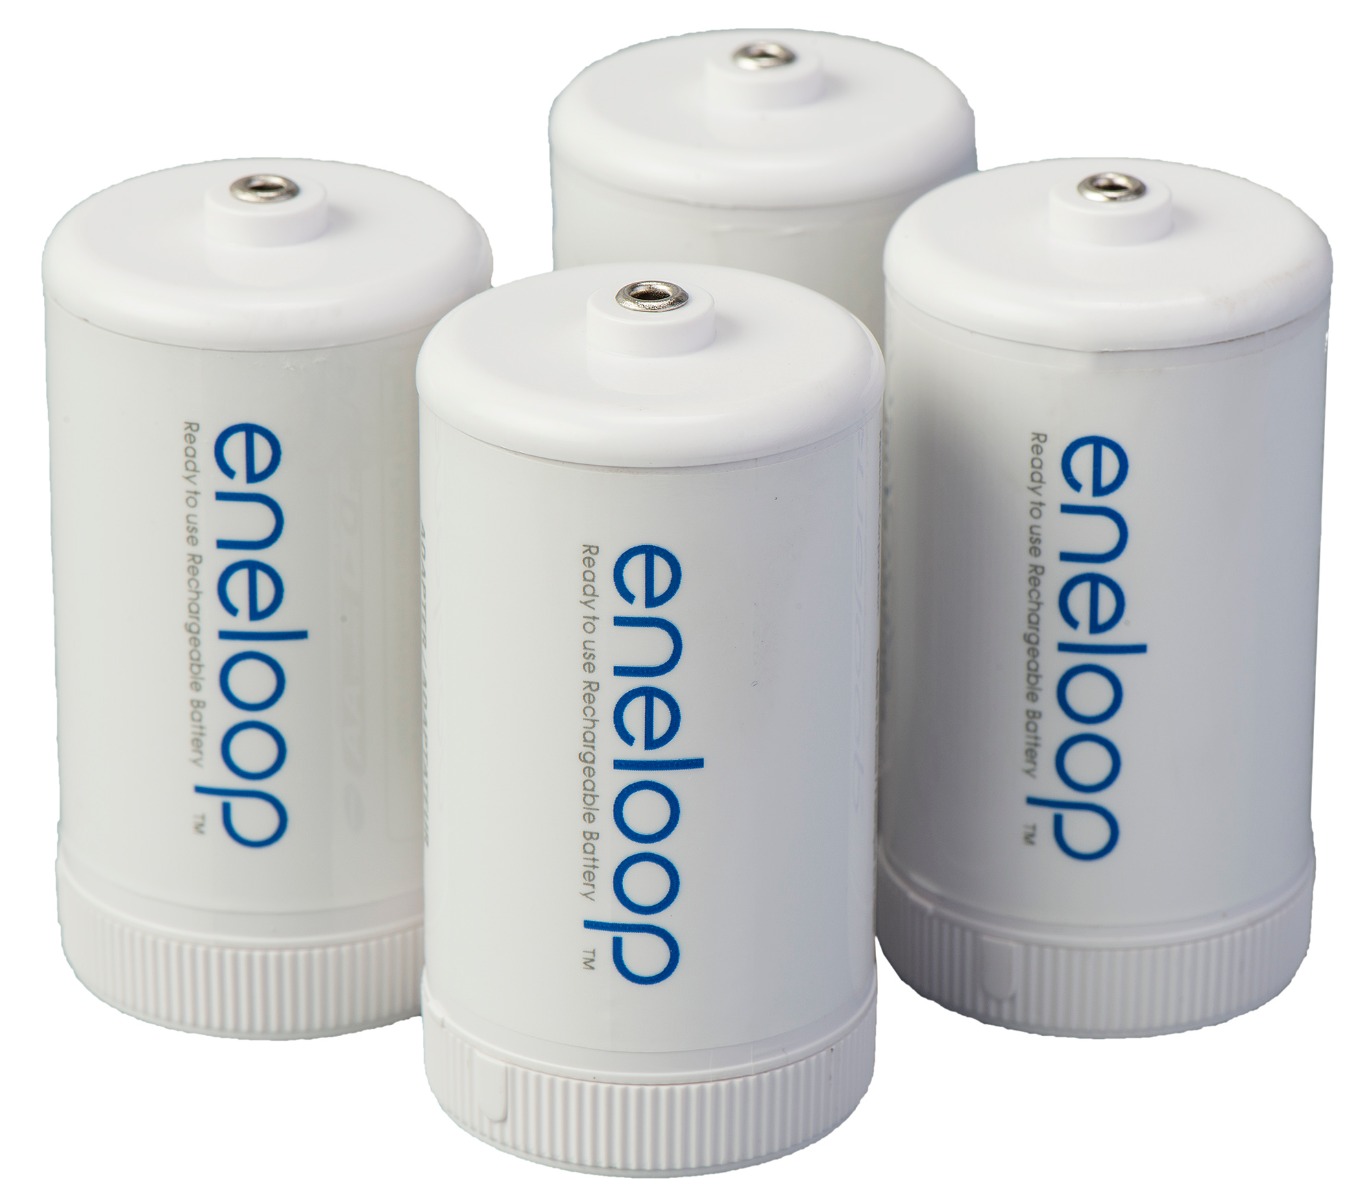 Panasonic BQ-BS1E4SA Eneloop D Size Battery Adapters for Use with Ni-MH Rechargeable AA Battery Cells, 4 Pack